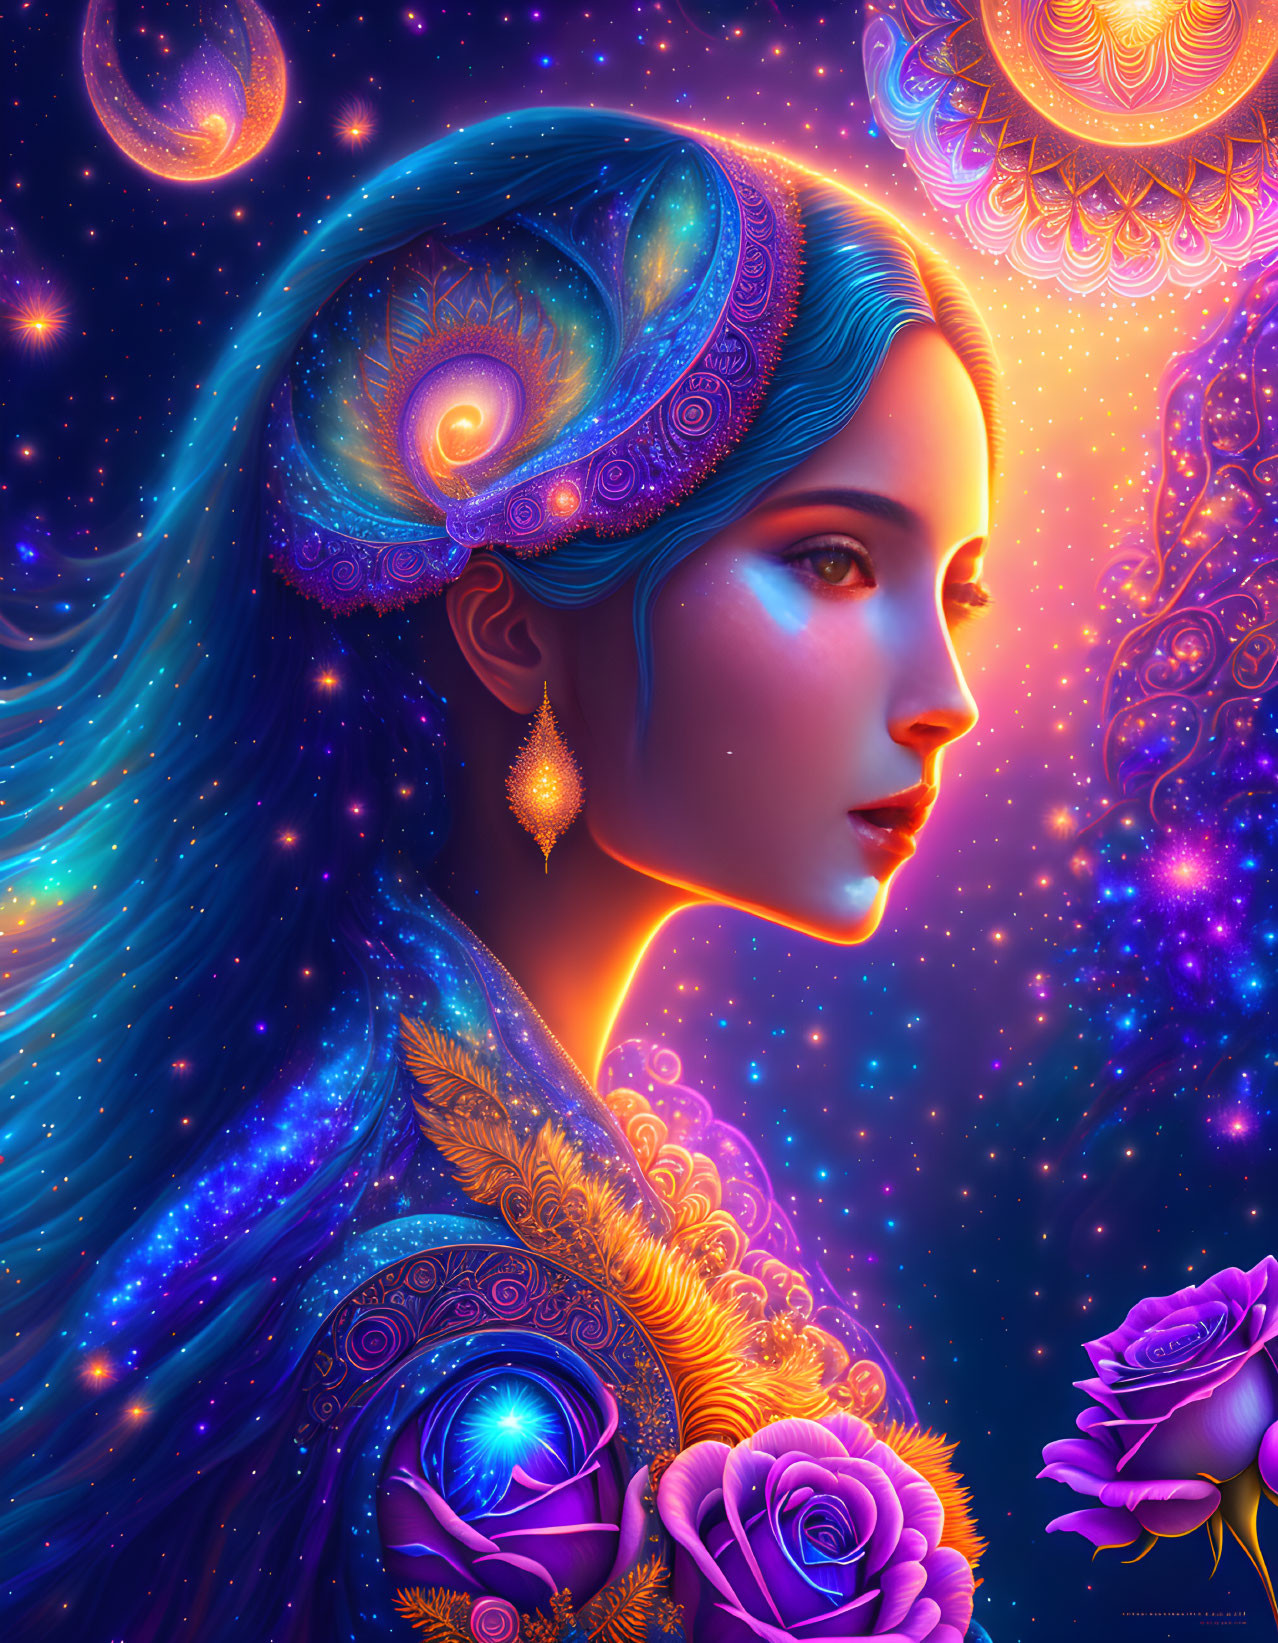 Colorful portrait of woman with blue hair in cosmic setting